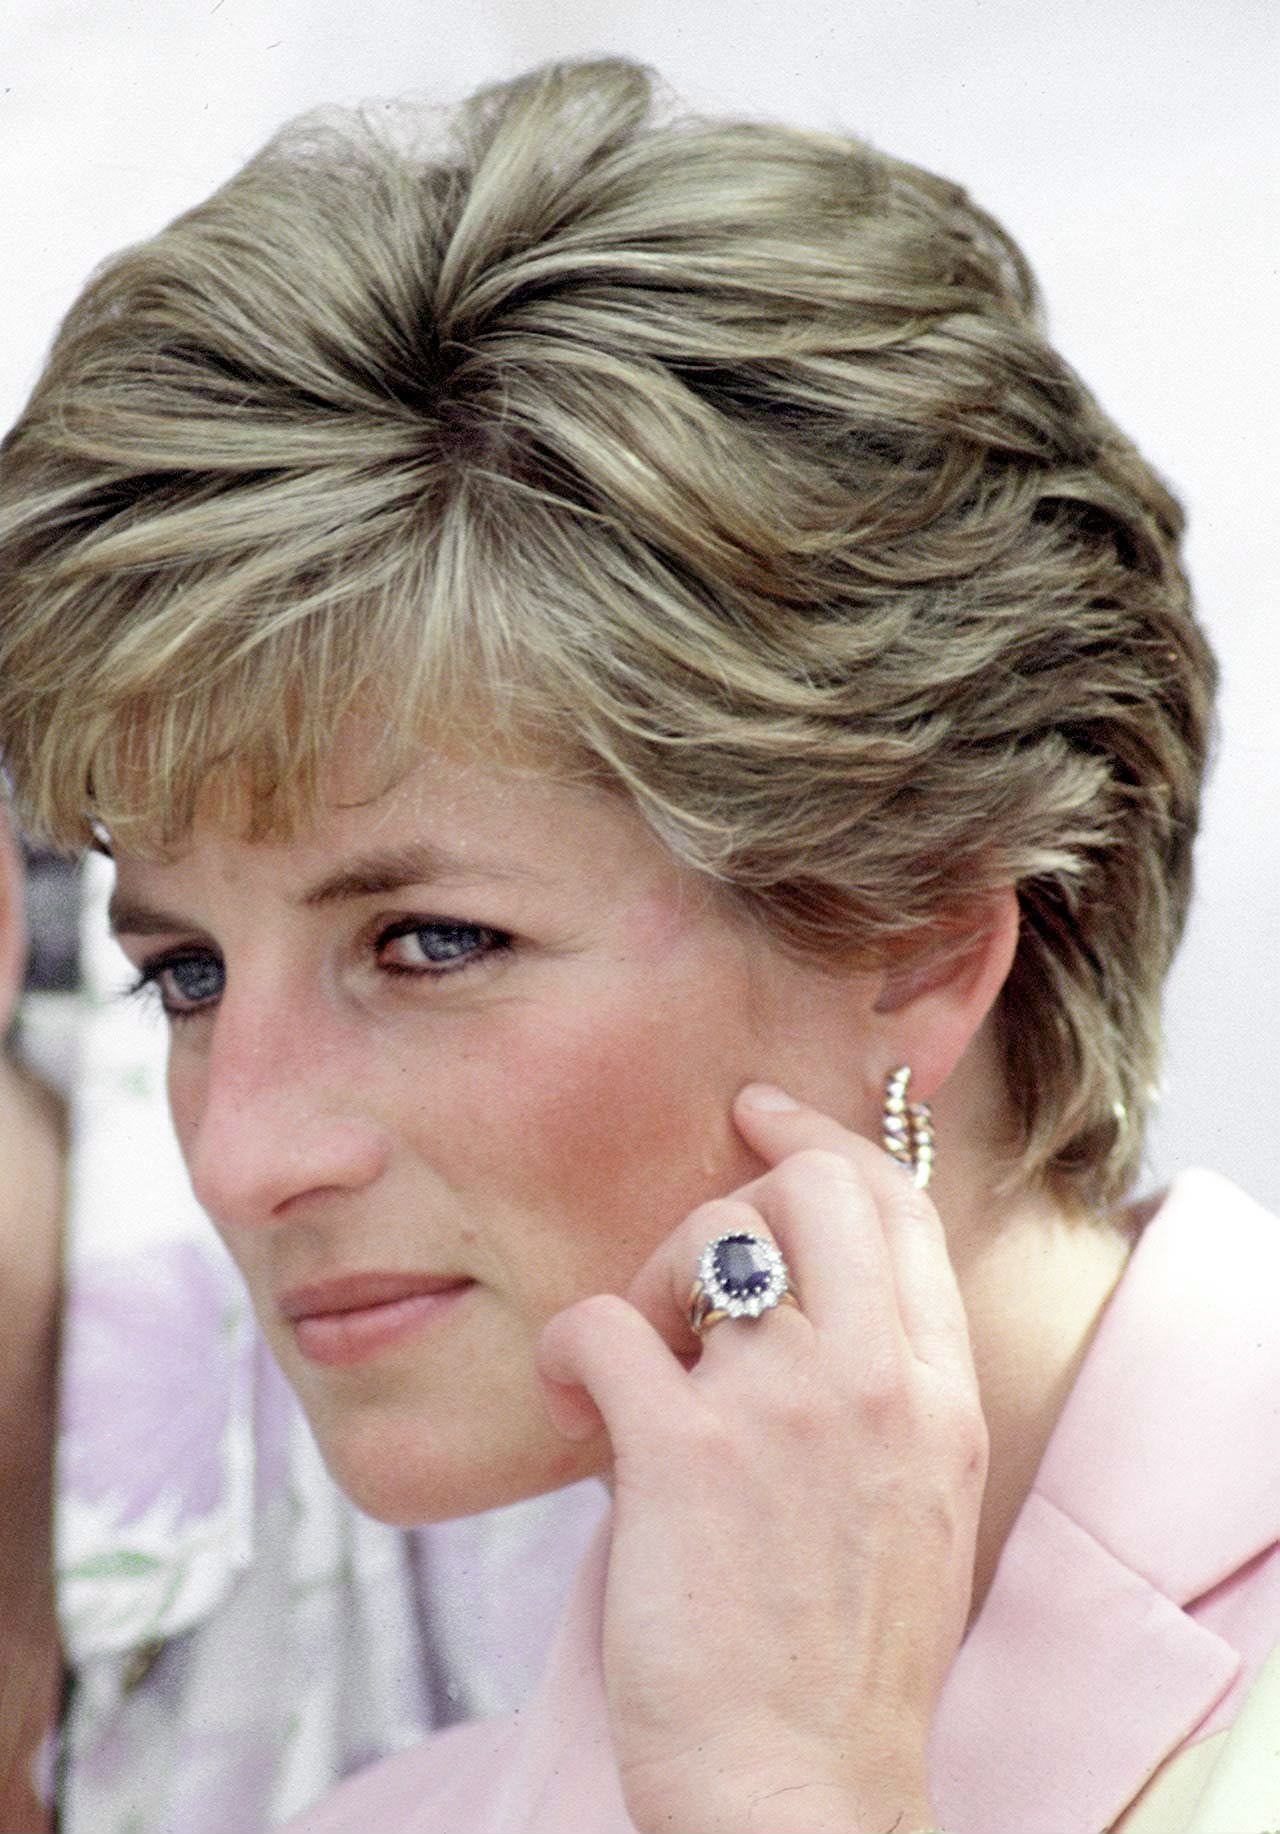 Princess Diana's engagement ring, which now belongs to the Duchess of Cambridge | Source: Getty Images